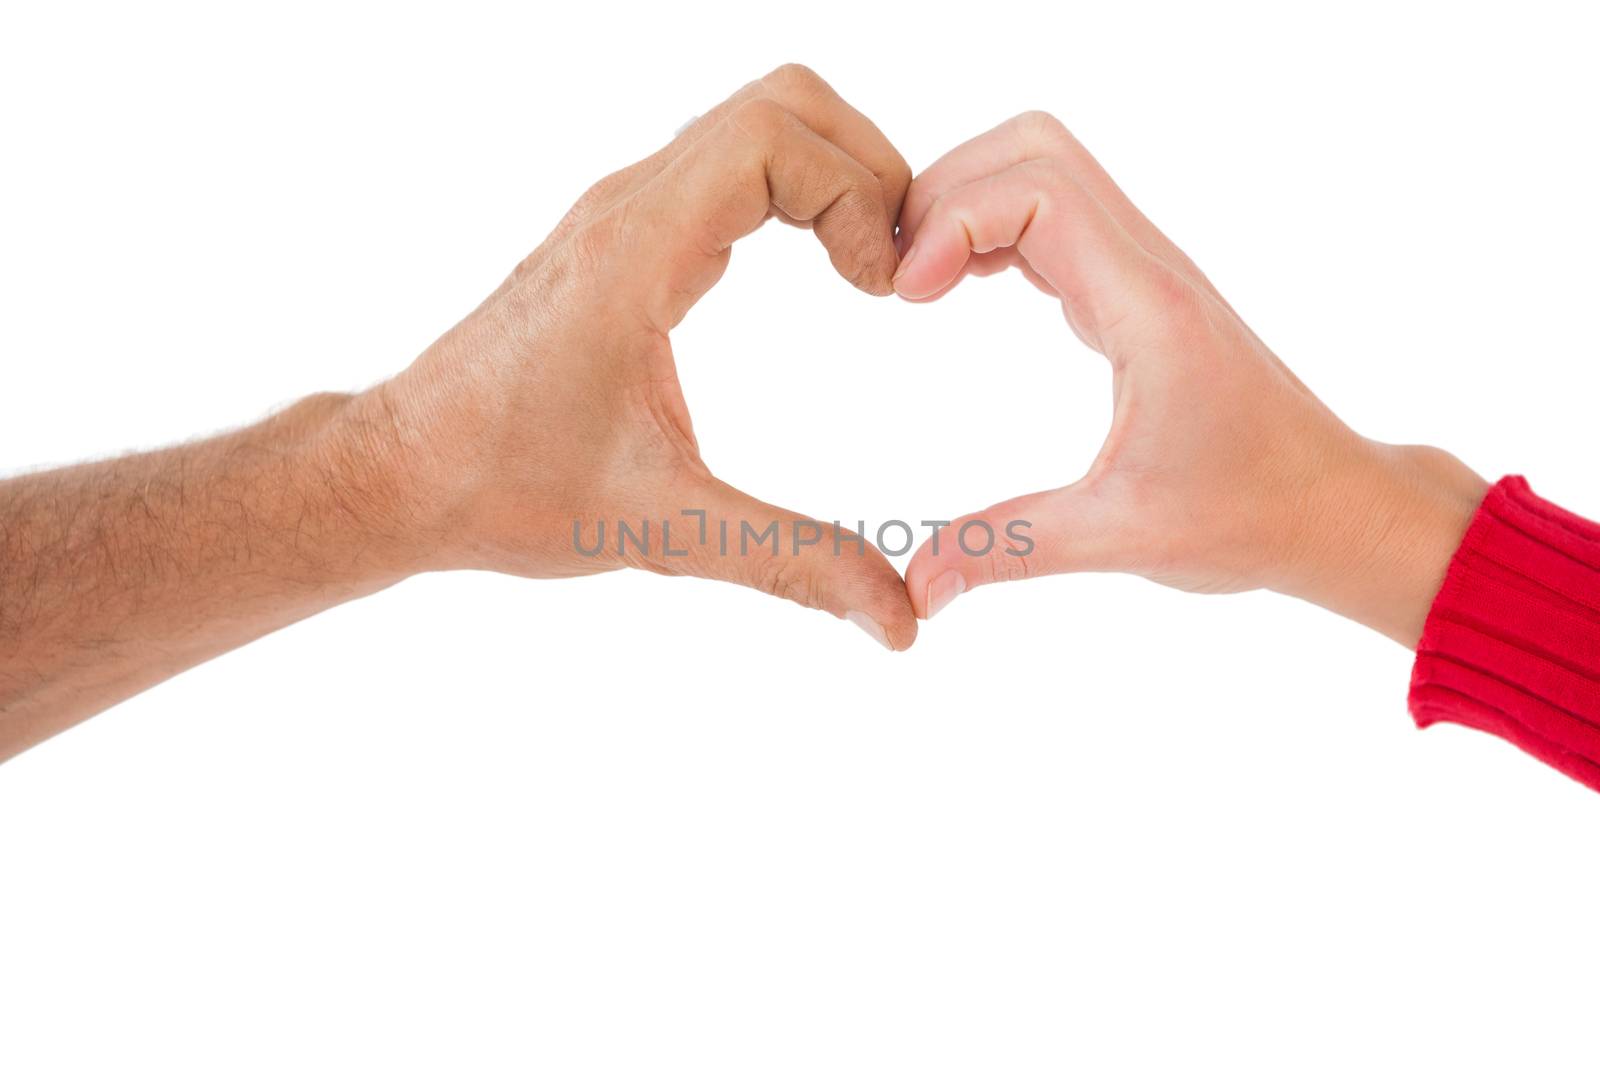 Couple making heart shape with hands on white background